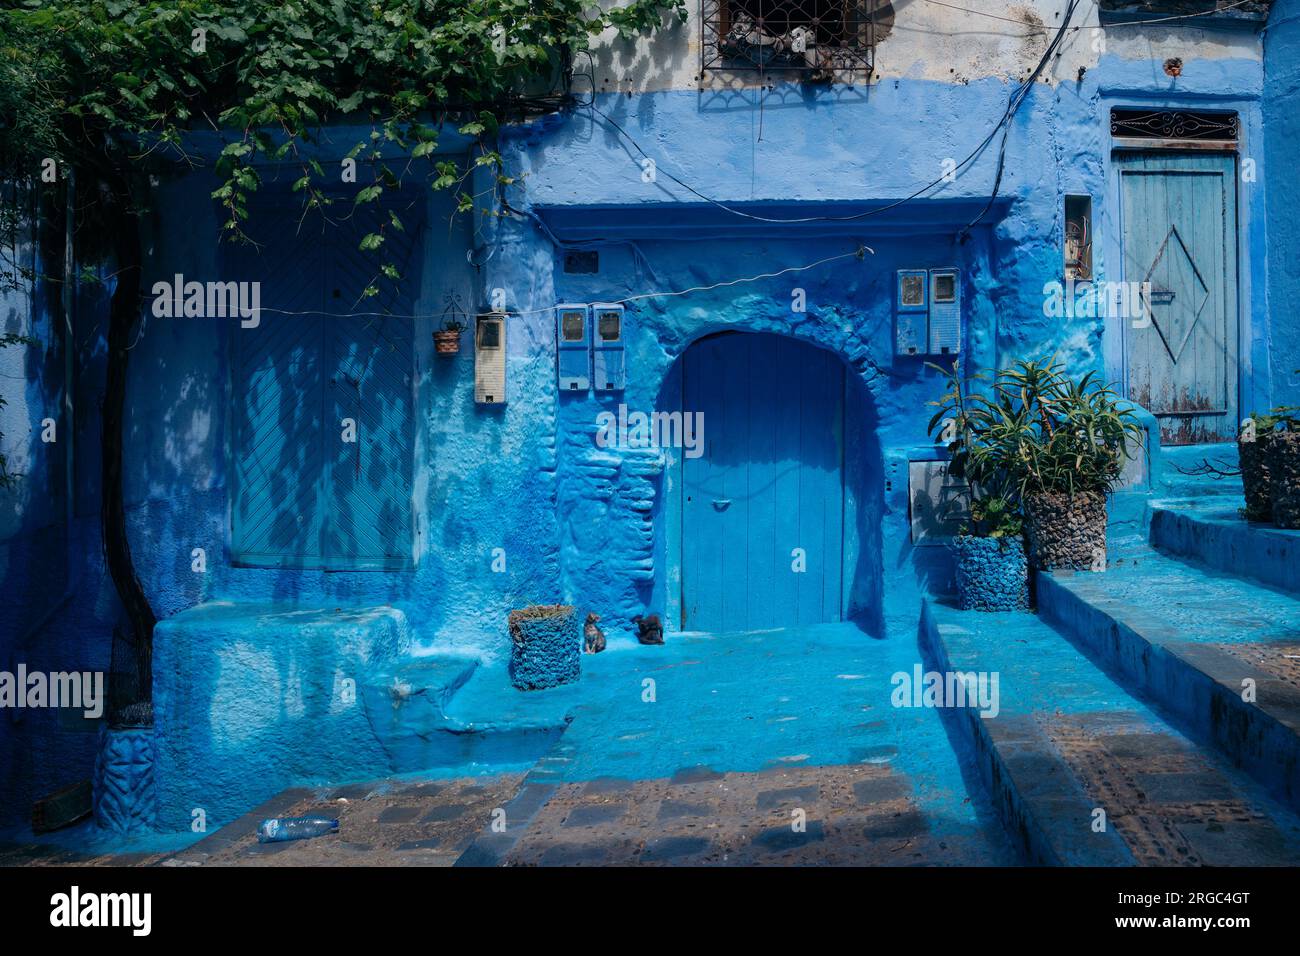 Chefchaouen, Morocco: The 'Blue City' nestled in the Rif Mountains, famous for its charming blue-painted streets, serene ambiance, and cultural allure Stock Photo